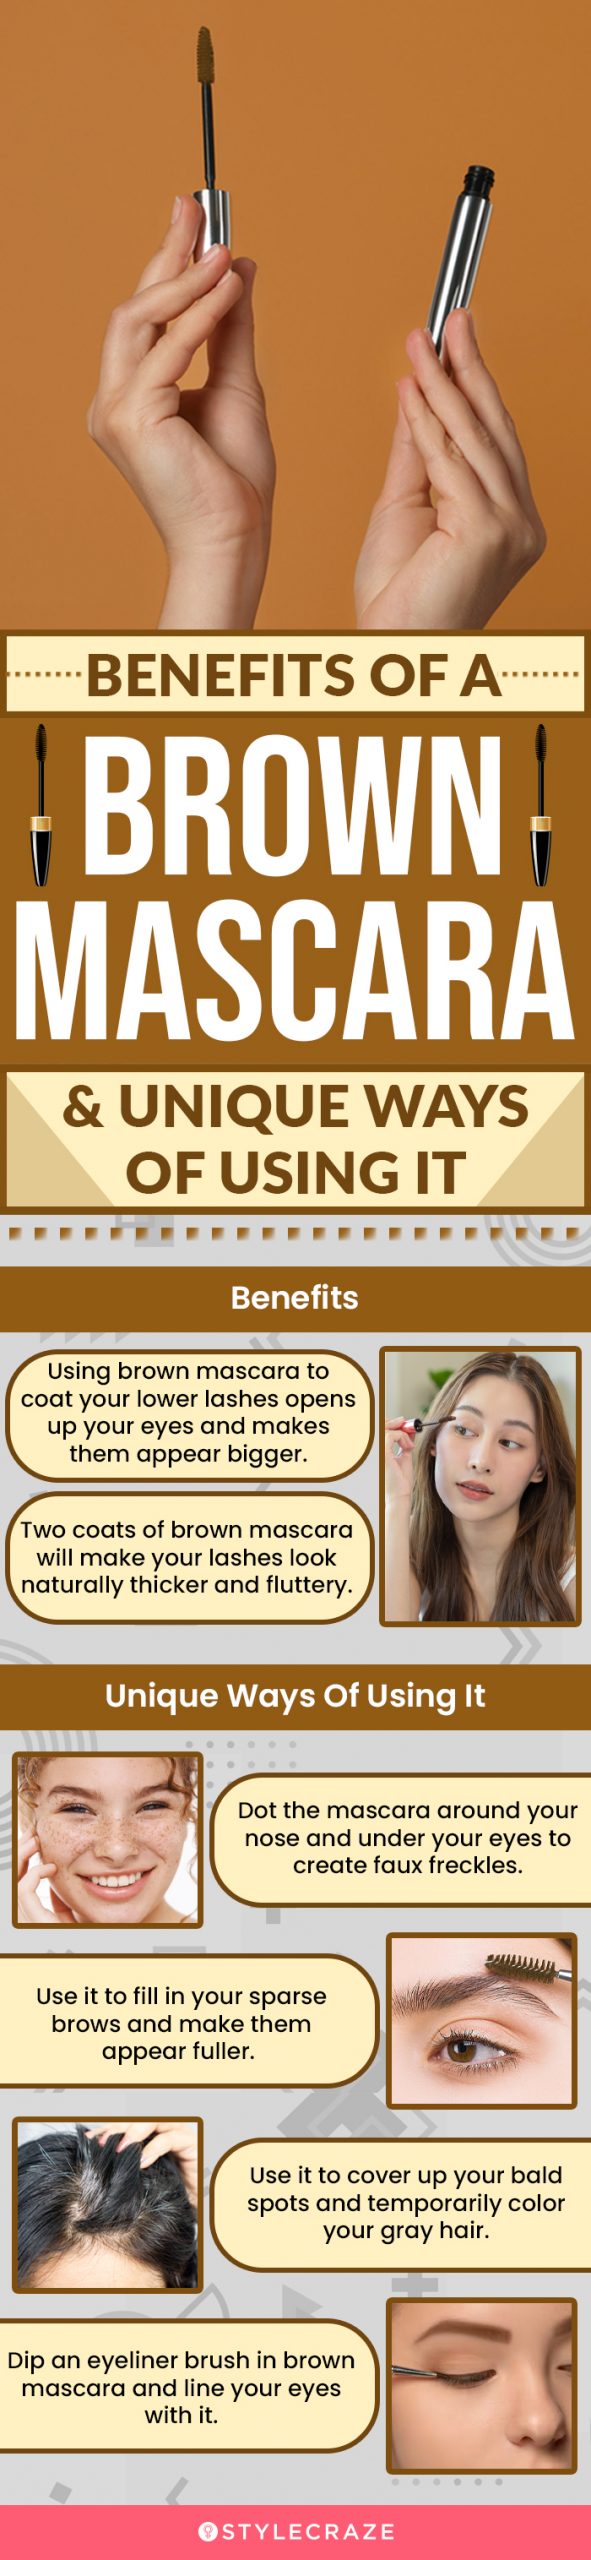 Benefits Of A Brown Mascara & Unique Ways Of Using It(infographic)